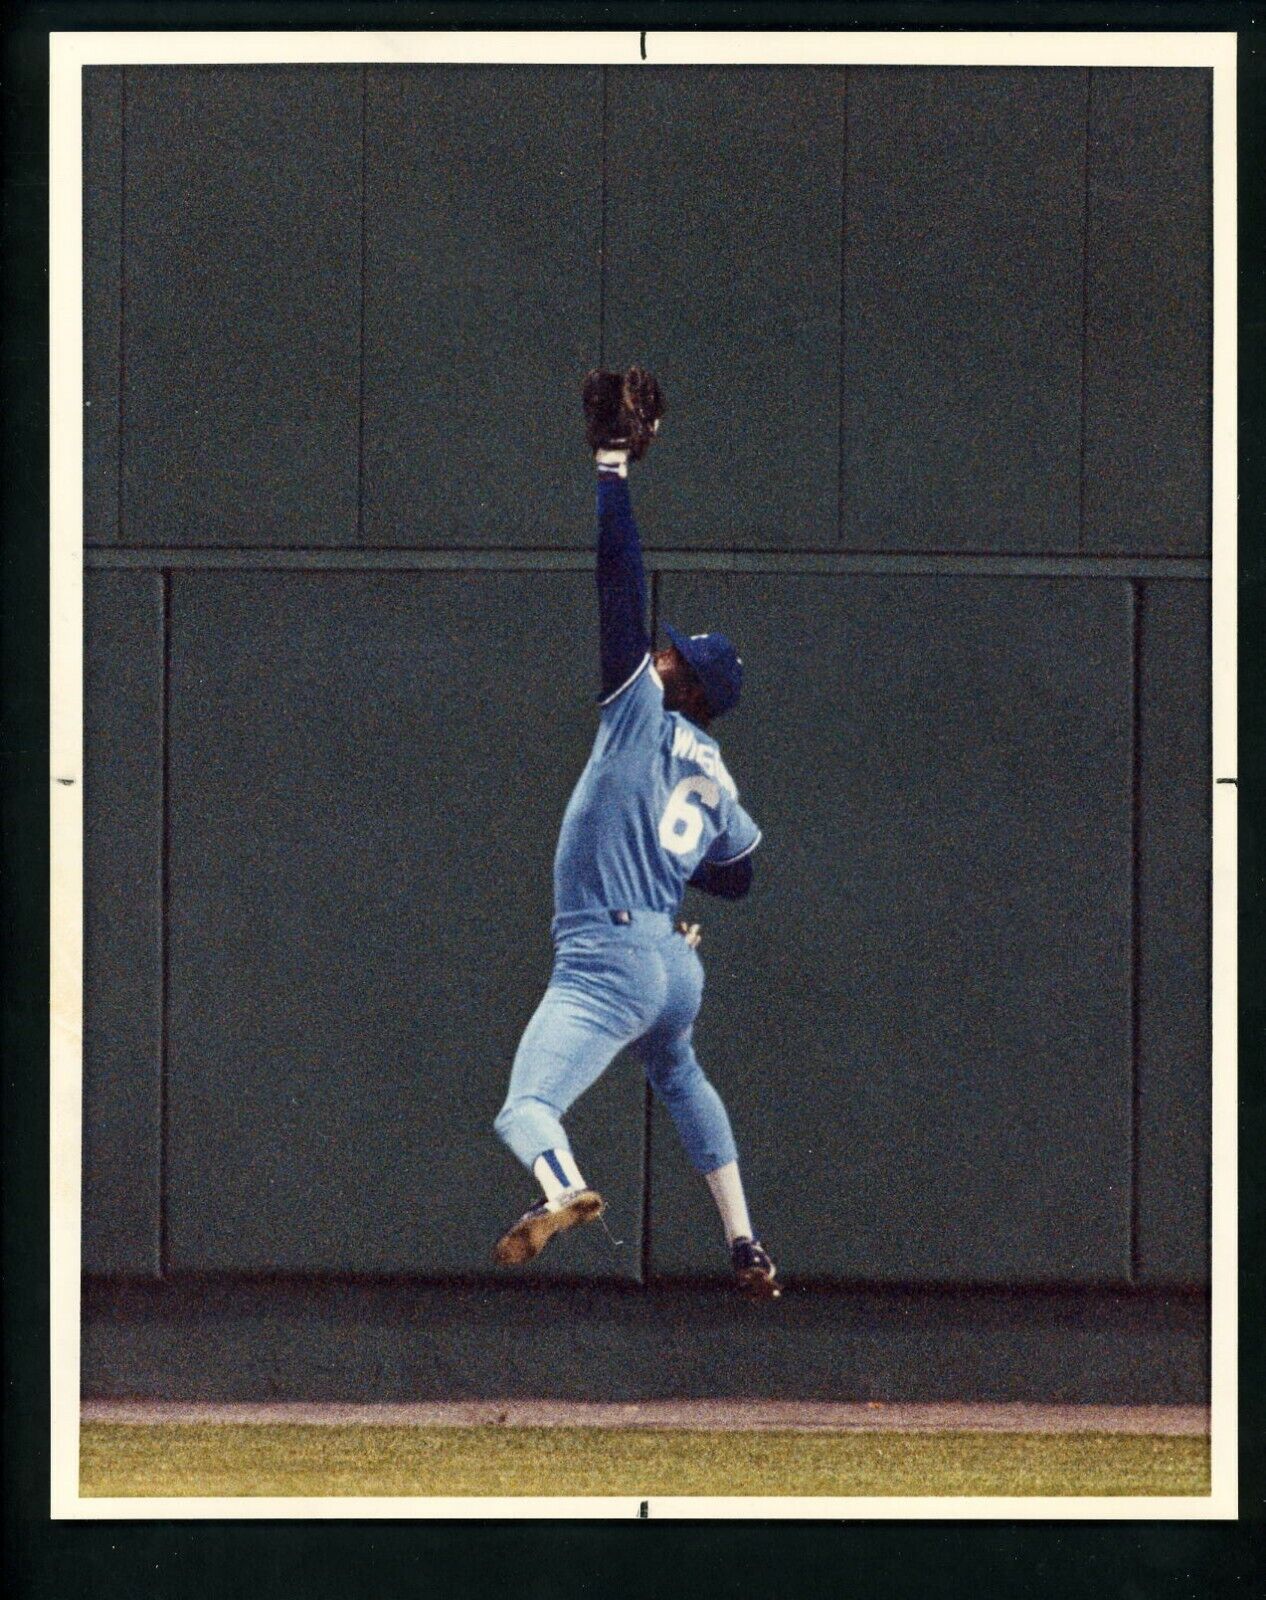 Willie Wilson leaping catch 1988 Press Original Photo Poster painting Kansas City Royals